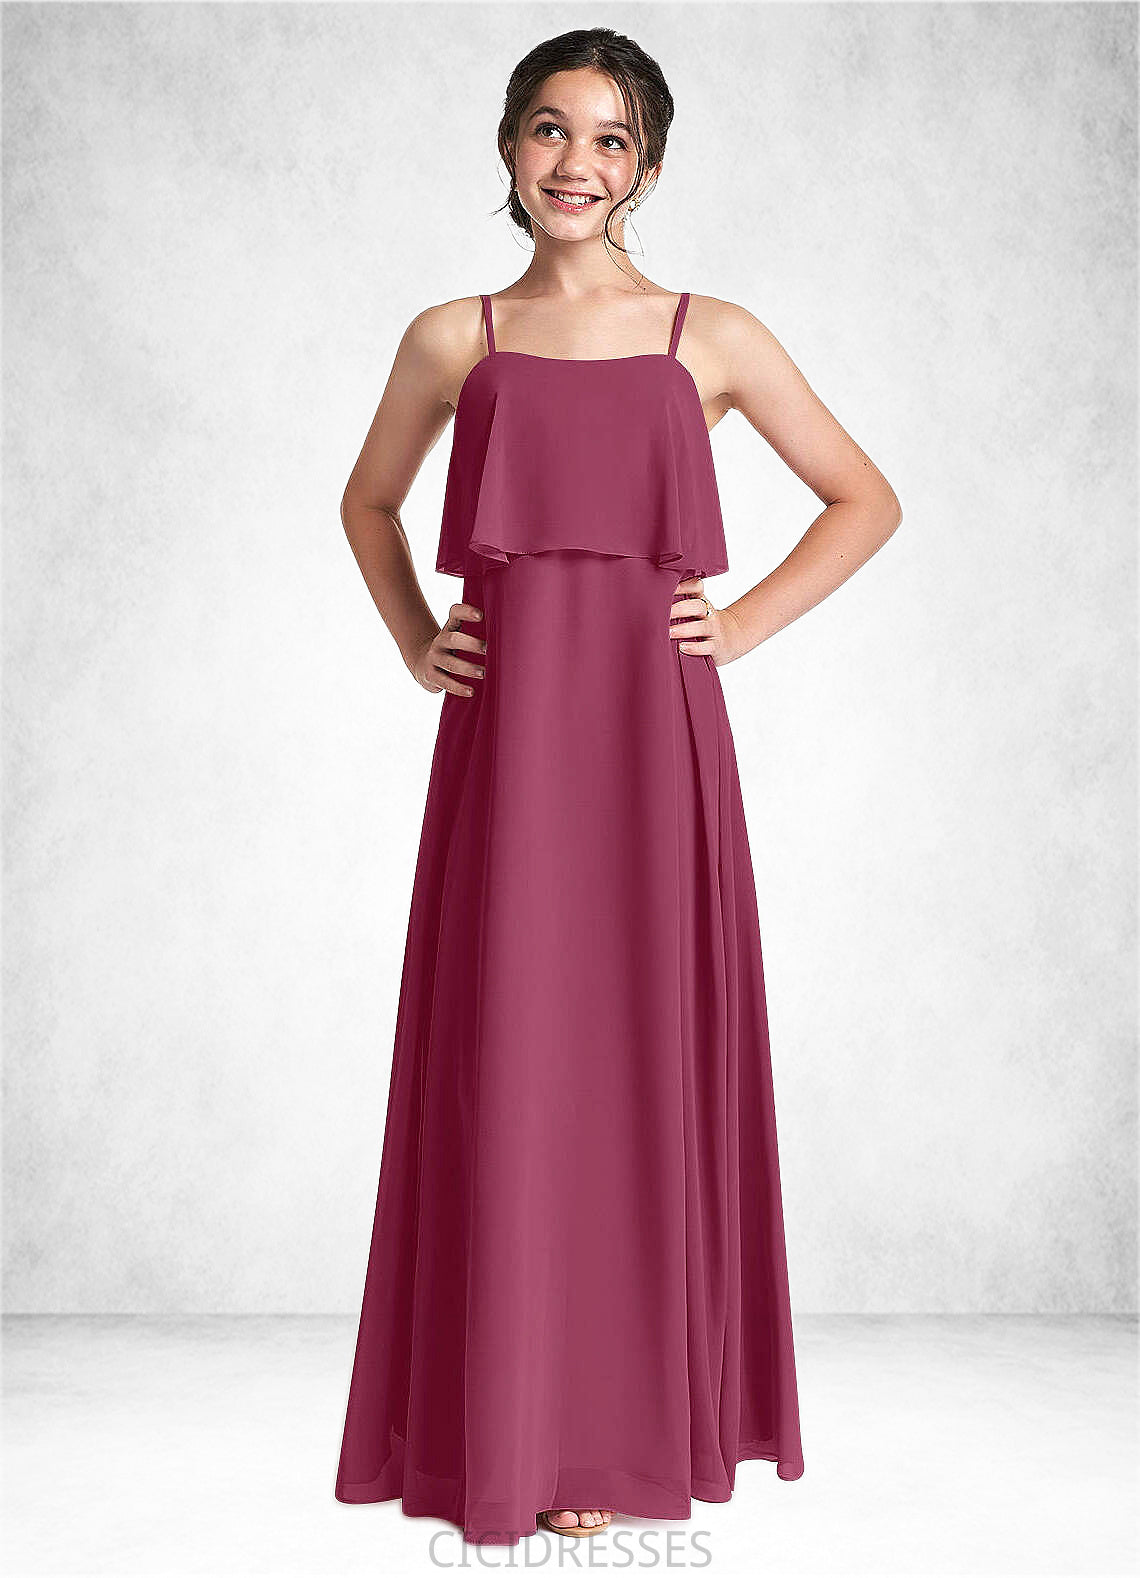 Tiana A-Line Ruched Chiffon Floor-Length Junior Bridesmaid Dress Mulberry CIC8P0022874